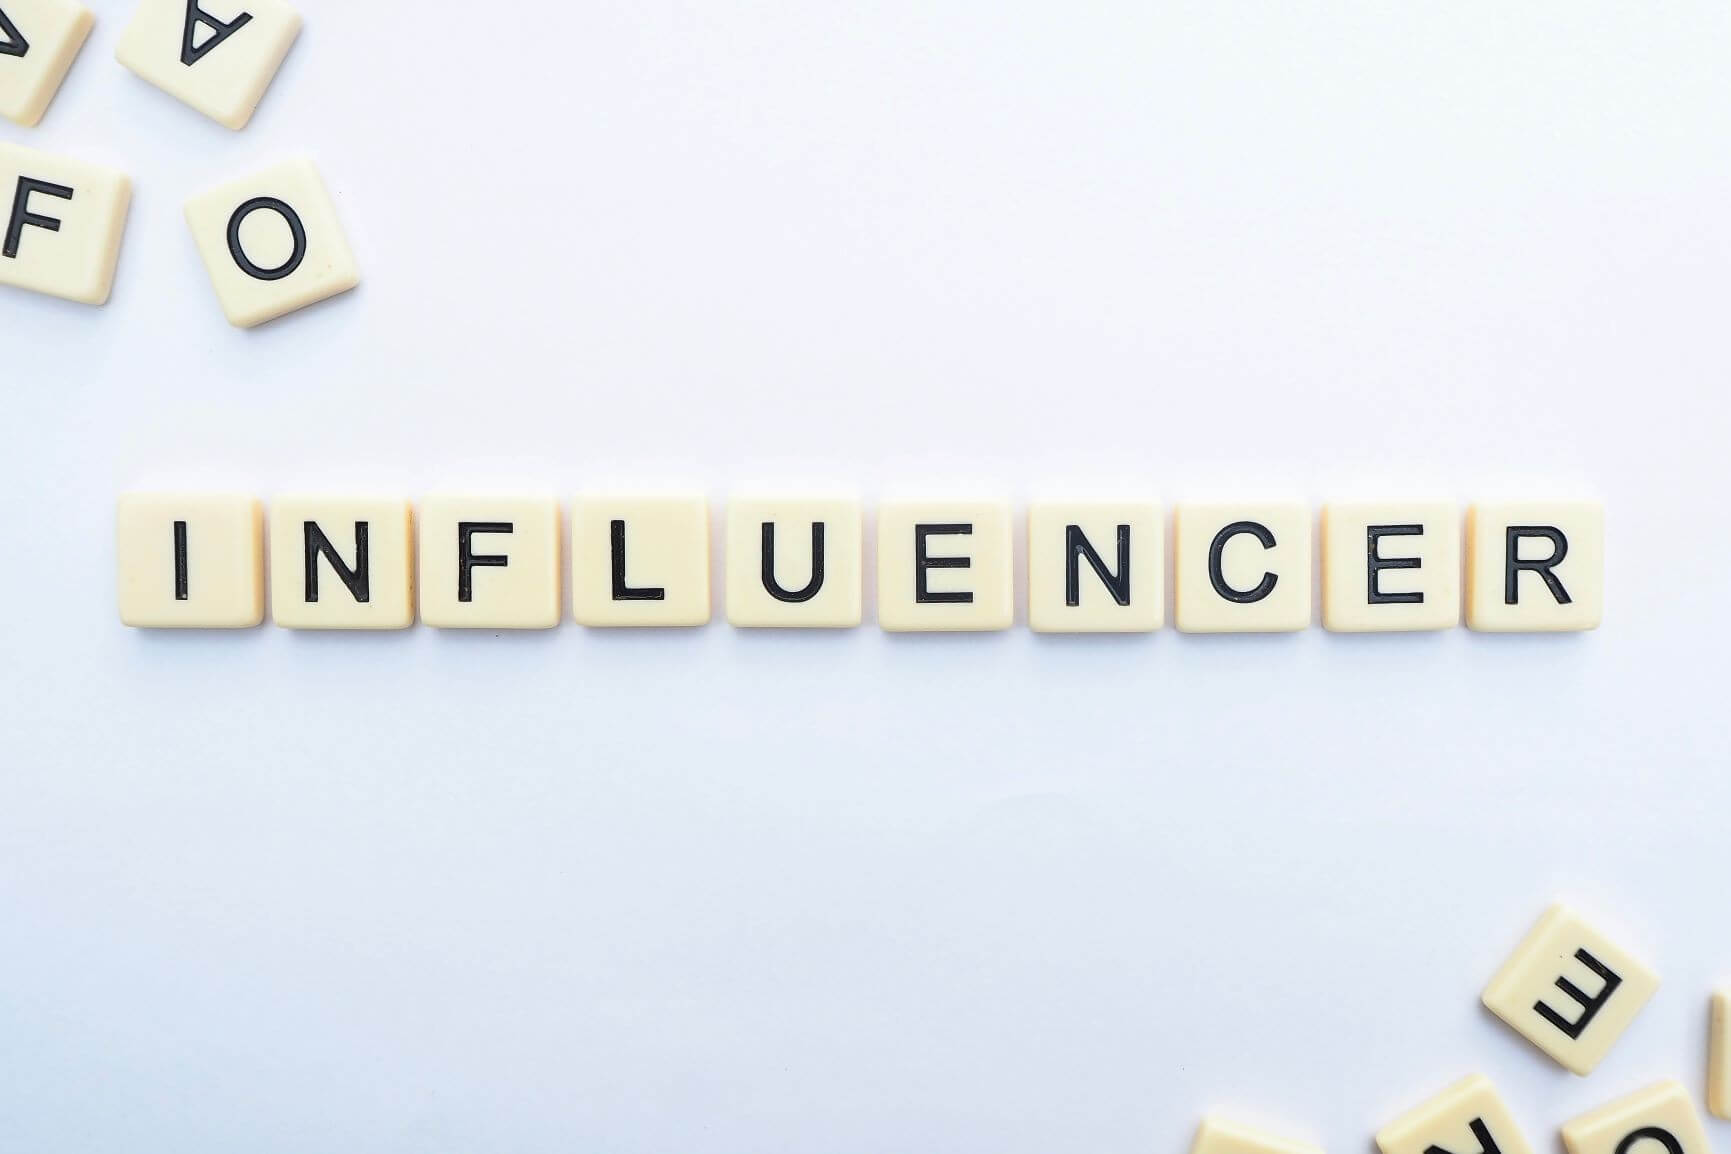 What is Influencer marketing?